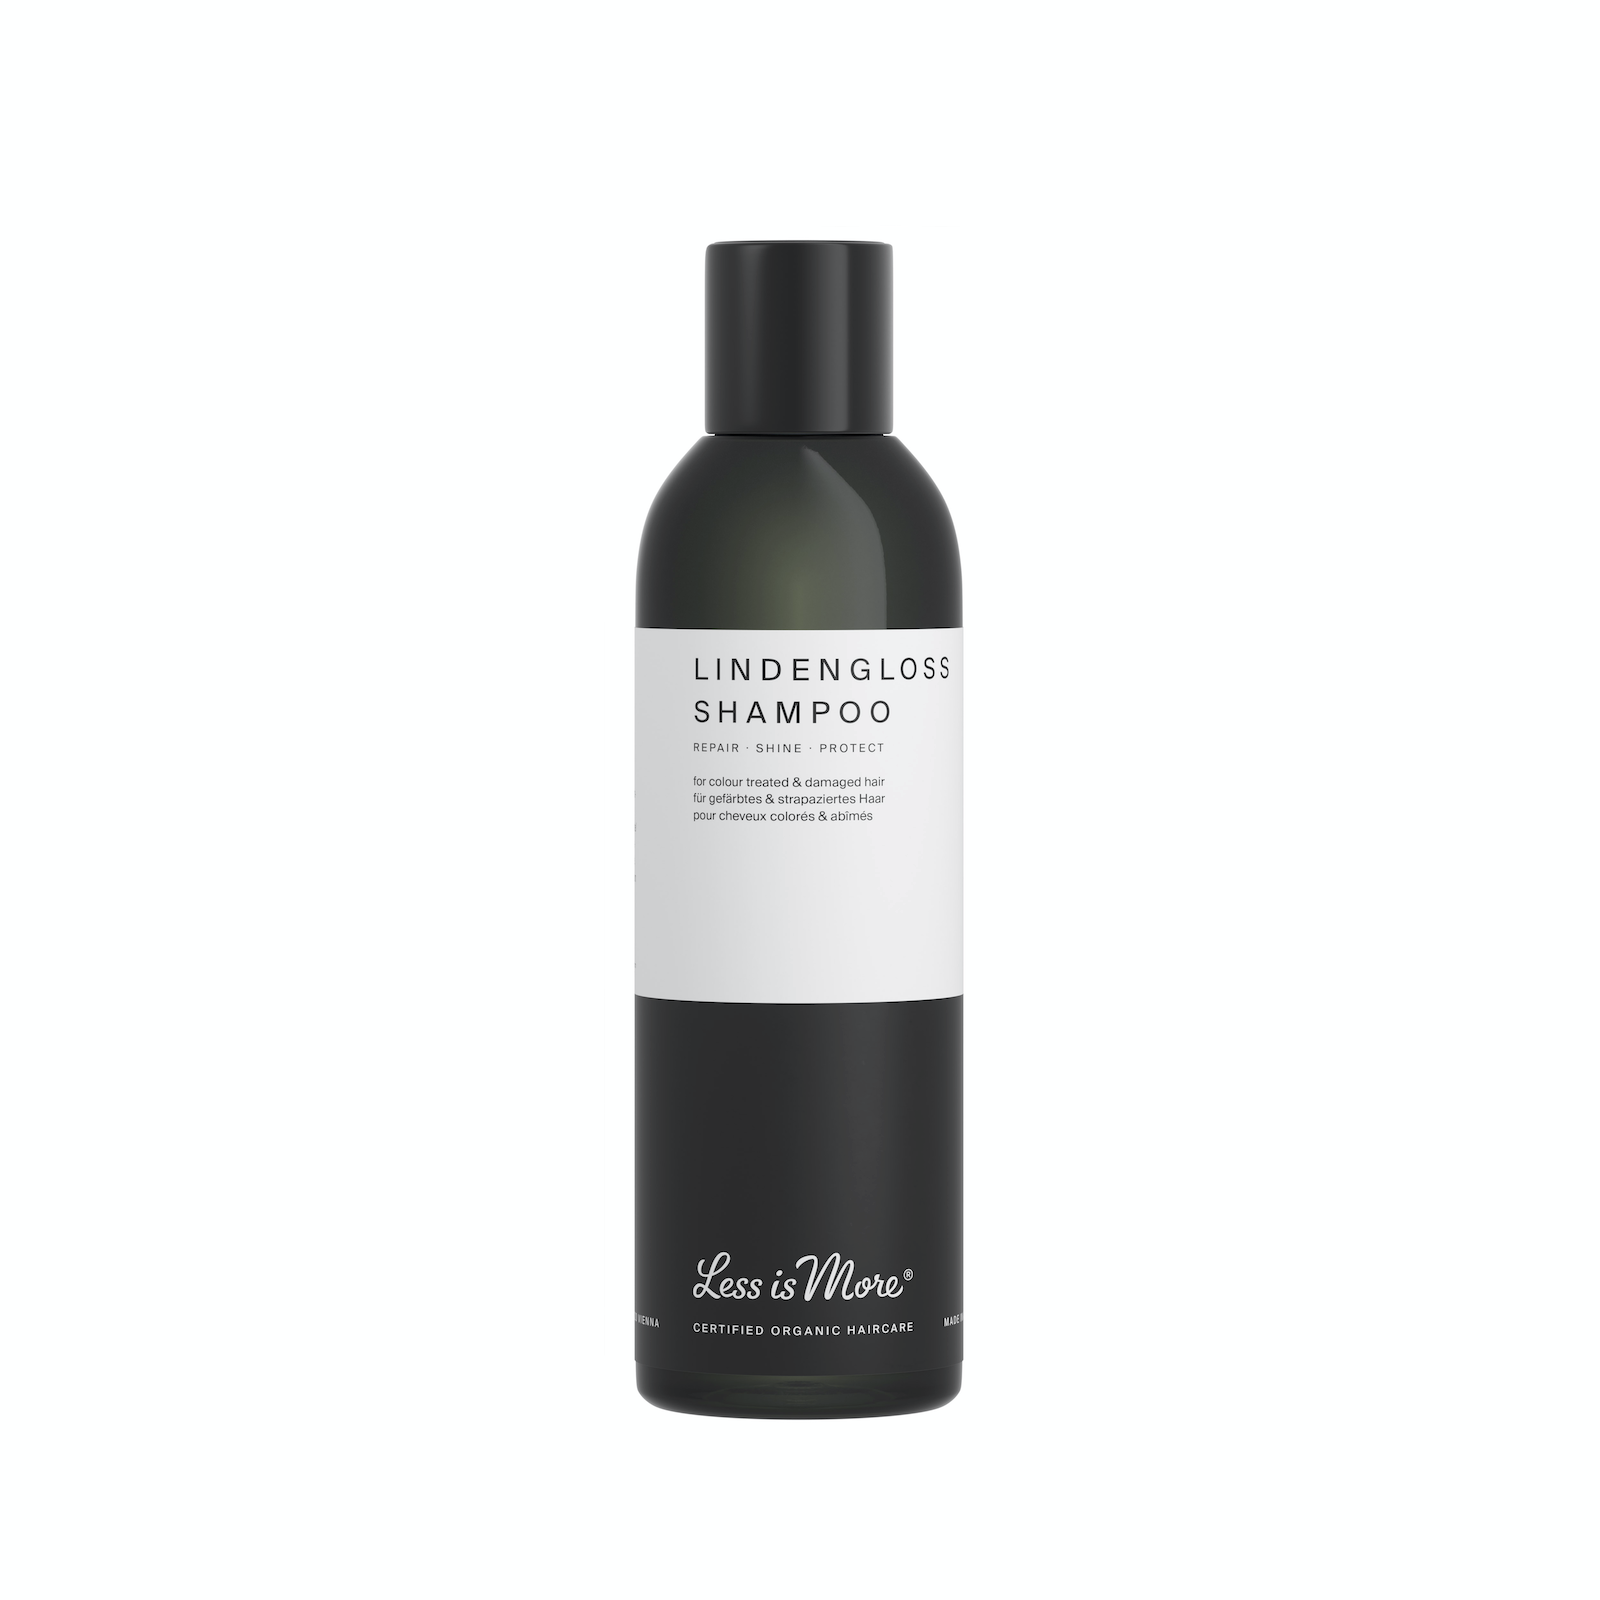 Lindengloss Shampoo 200 ml from Less Is More